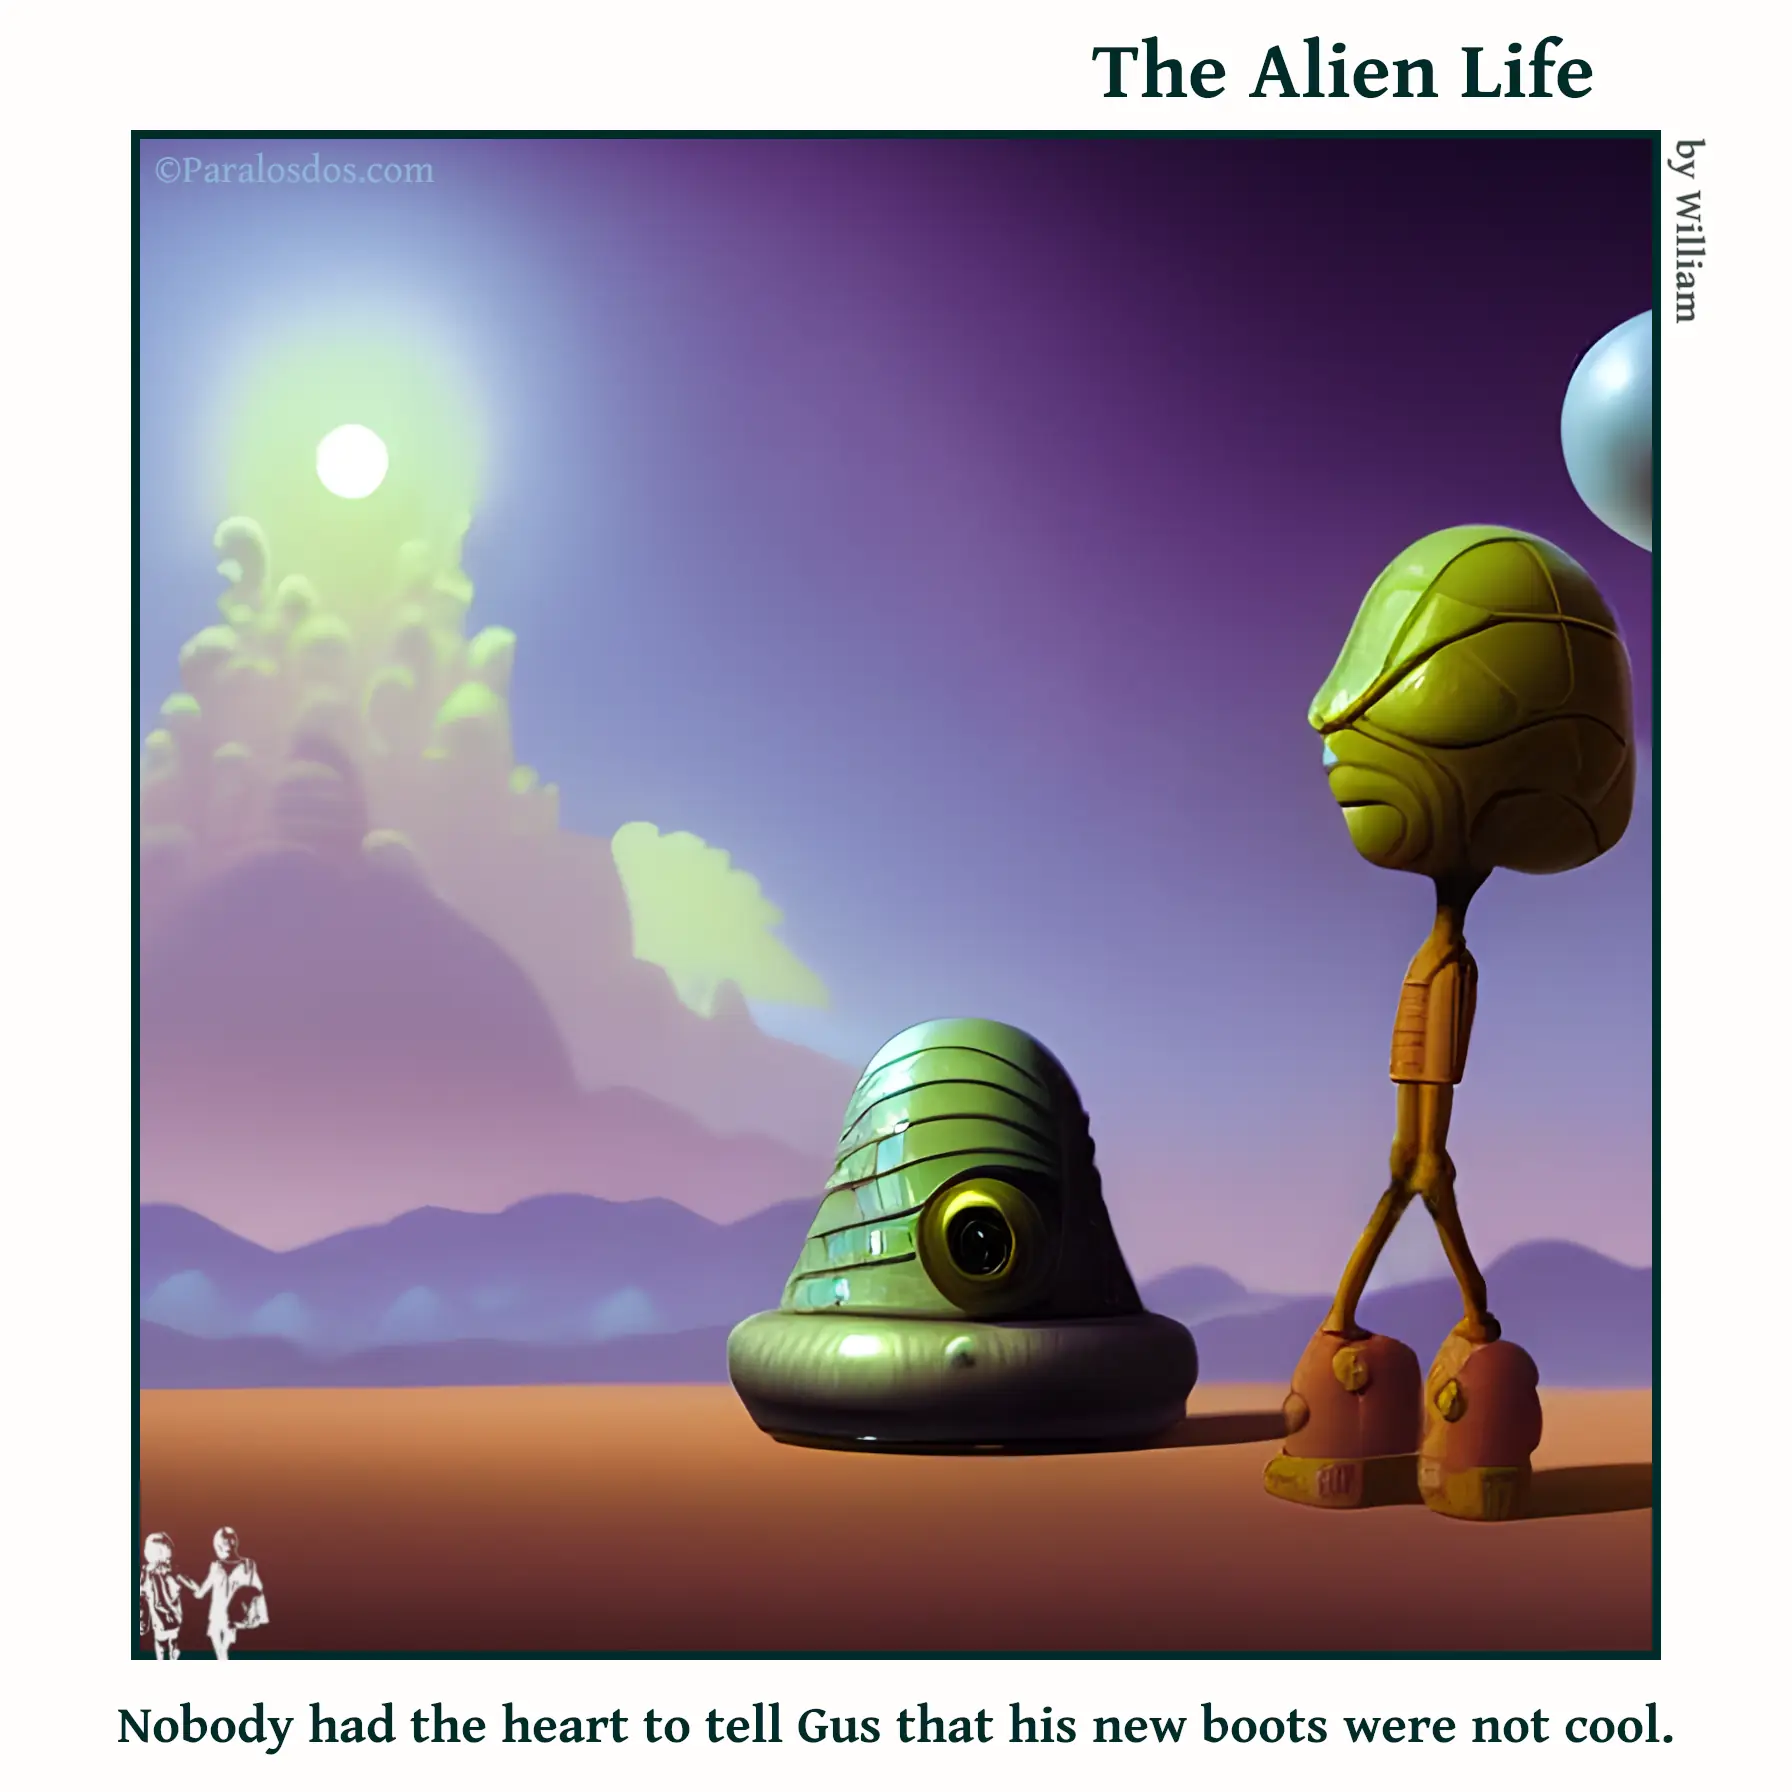 The Alien Life, one panel Comic. An alien is wearing awful, big and blocky boots. The caption reads: Nobody had the heart to tell Gus that his new boots were not cool.